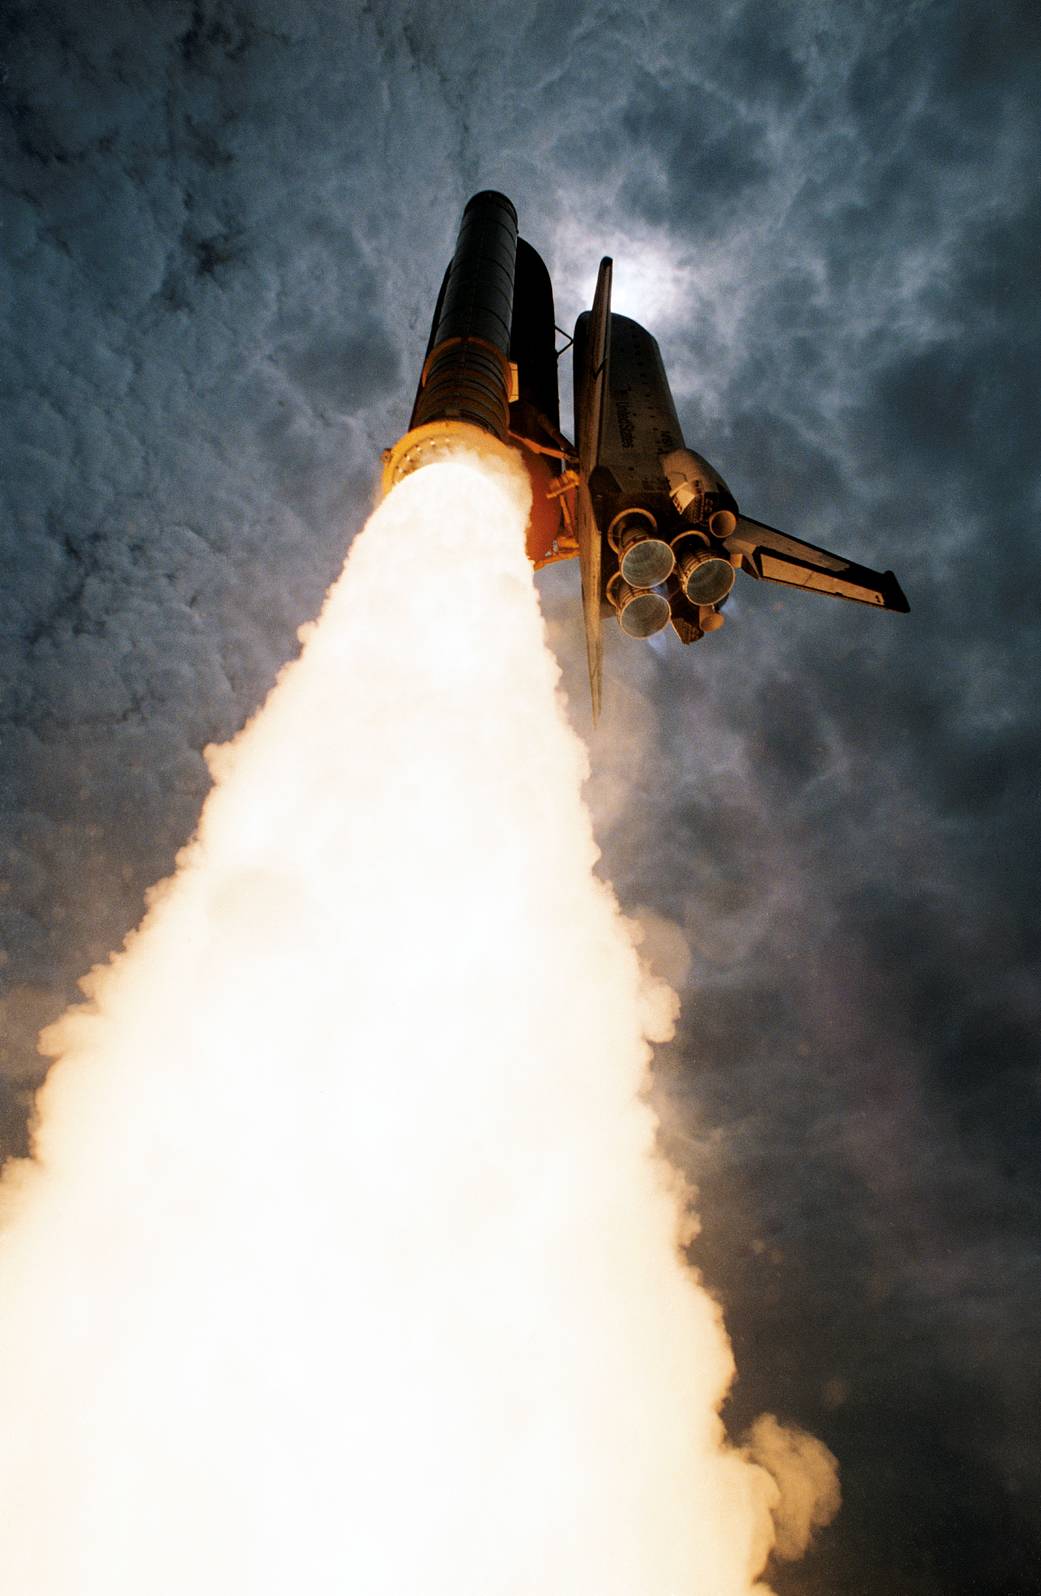 Shuttle launching upward to space, captured from angle on ground